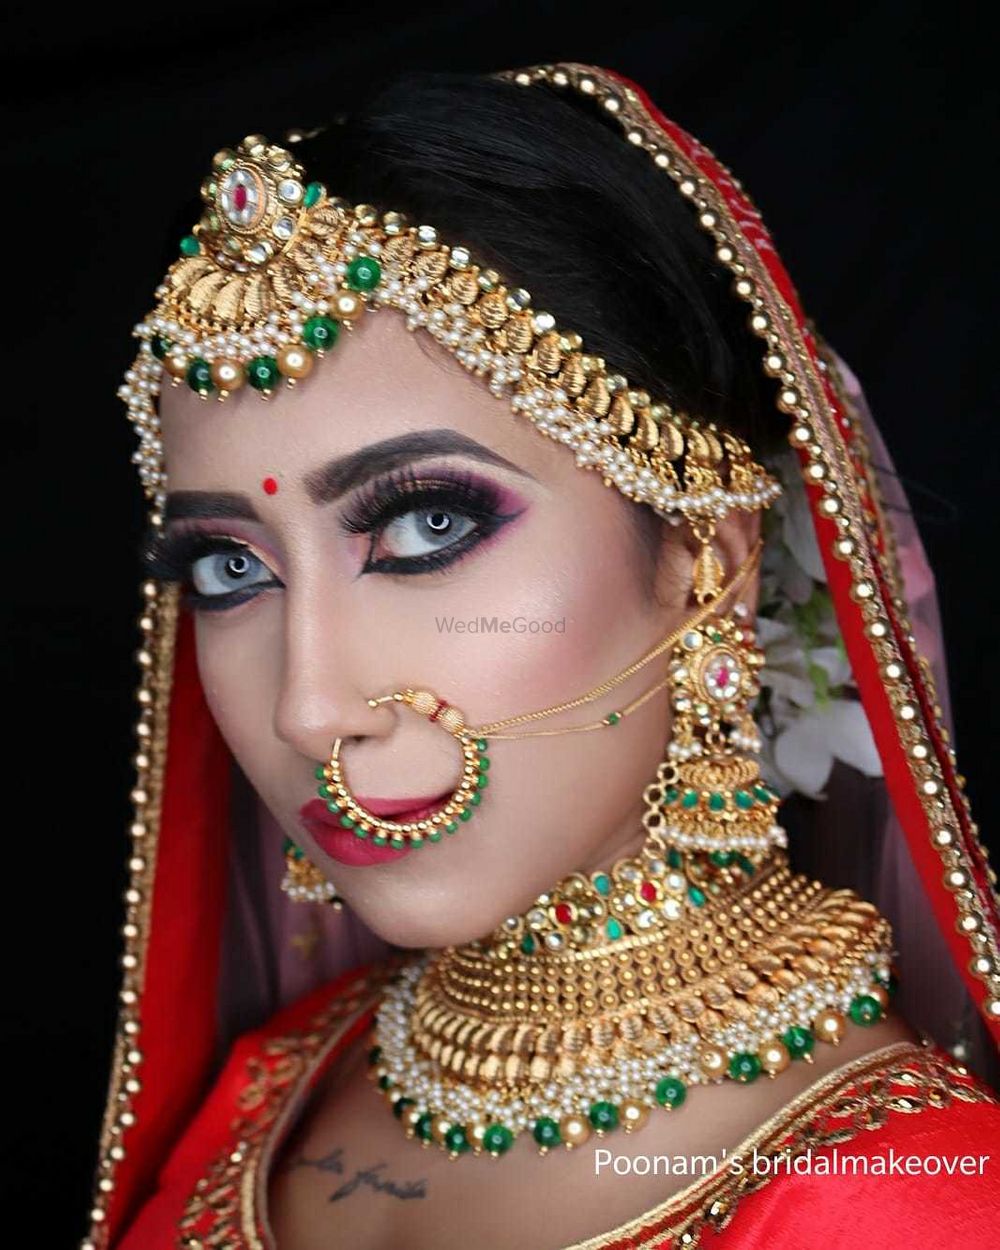 Photo From My Creativity - By Poonam Bridal Makeover